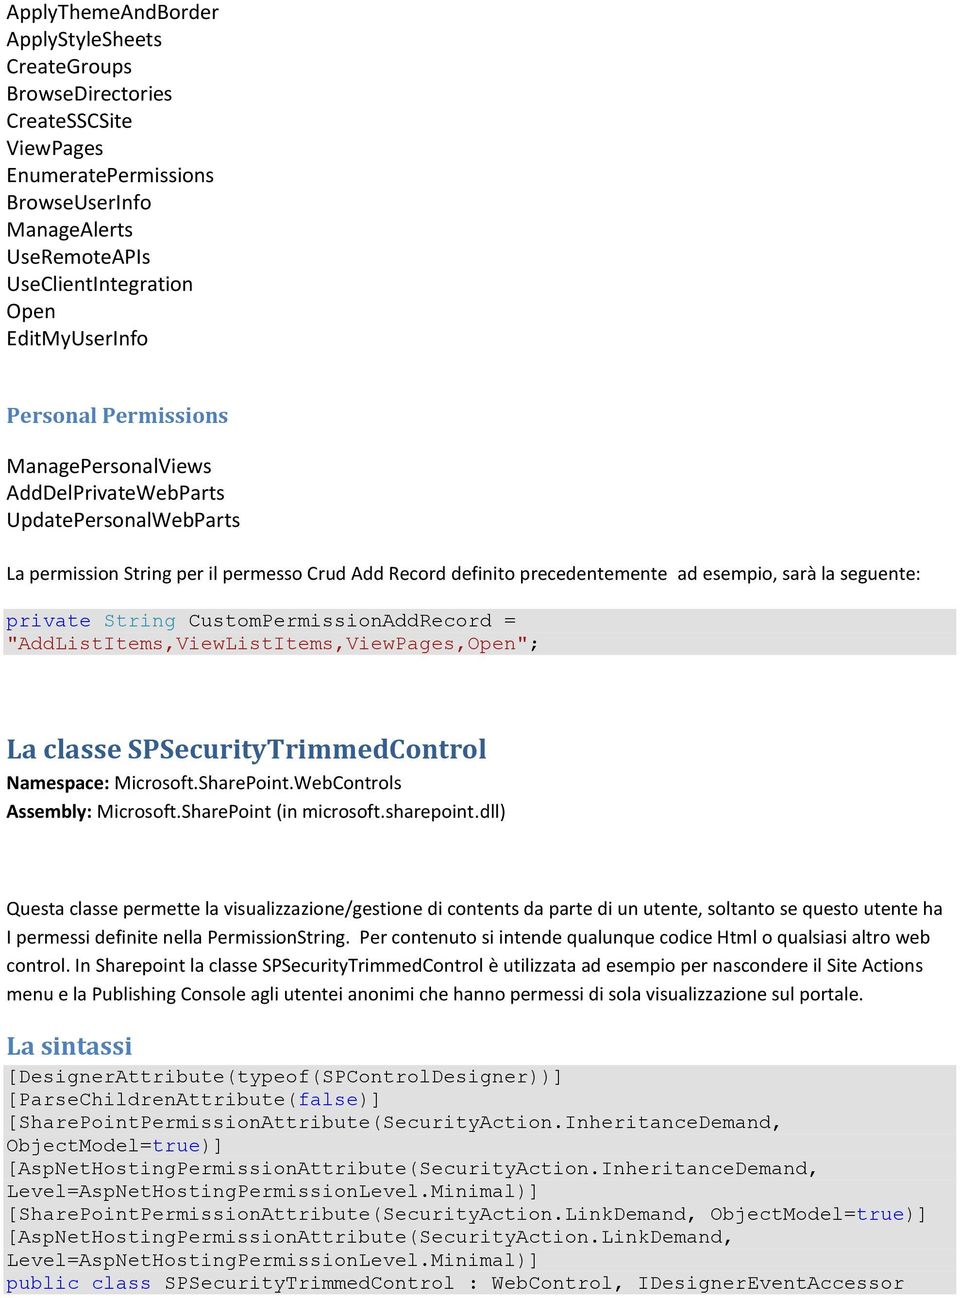 private String CustomPermissionAddRecord = "AddListItems,ViewListItems,ViewPages,Open"; La classe SPSecurityTrimmedControl Namespace: Microsoft.SharePoint.WebControls Assembly: Microsoft.